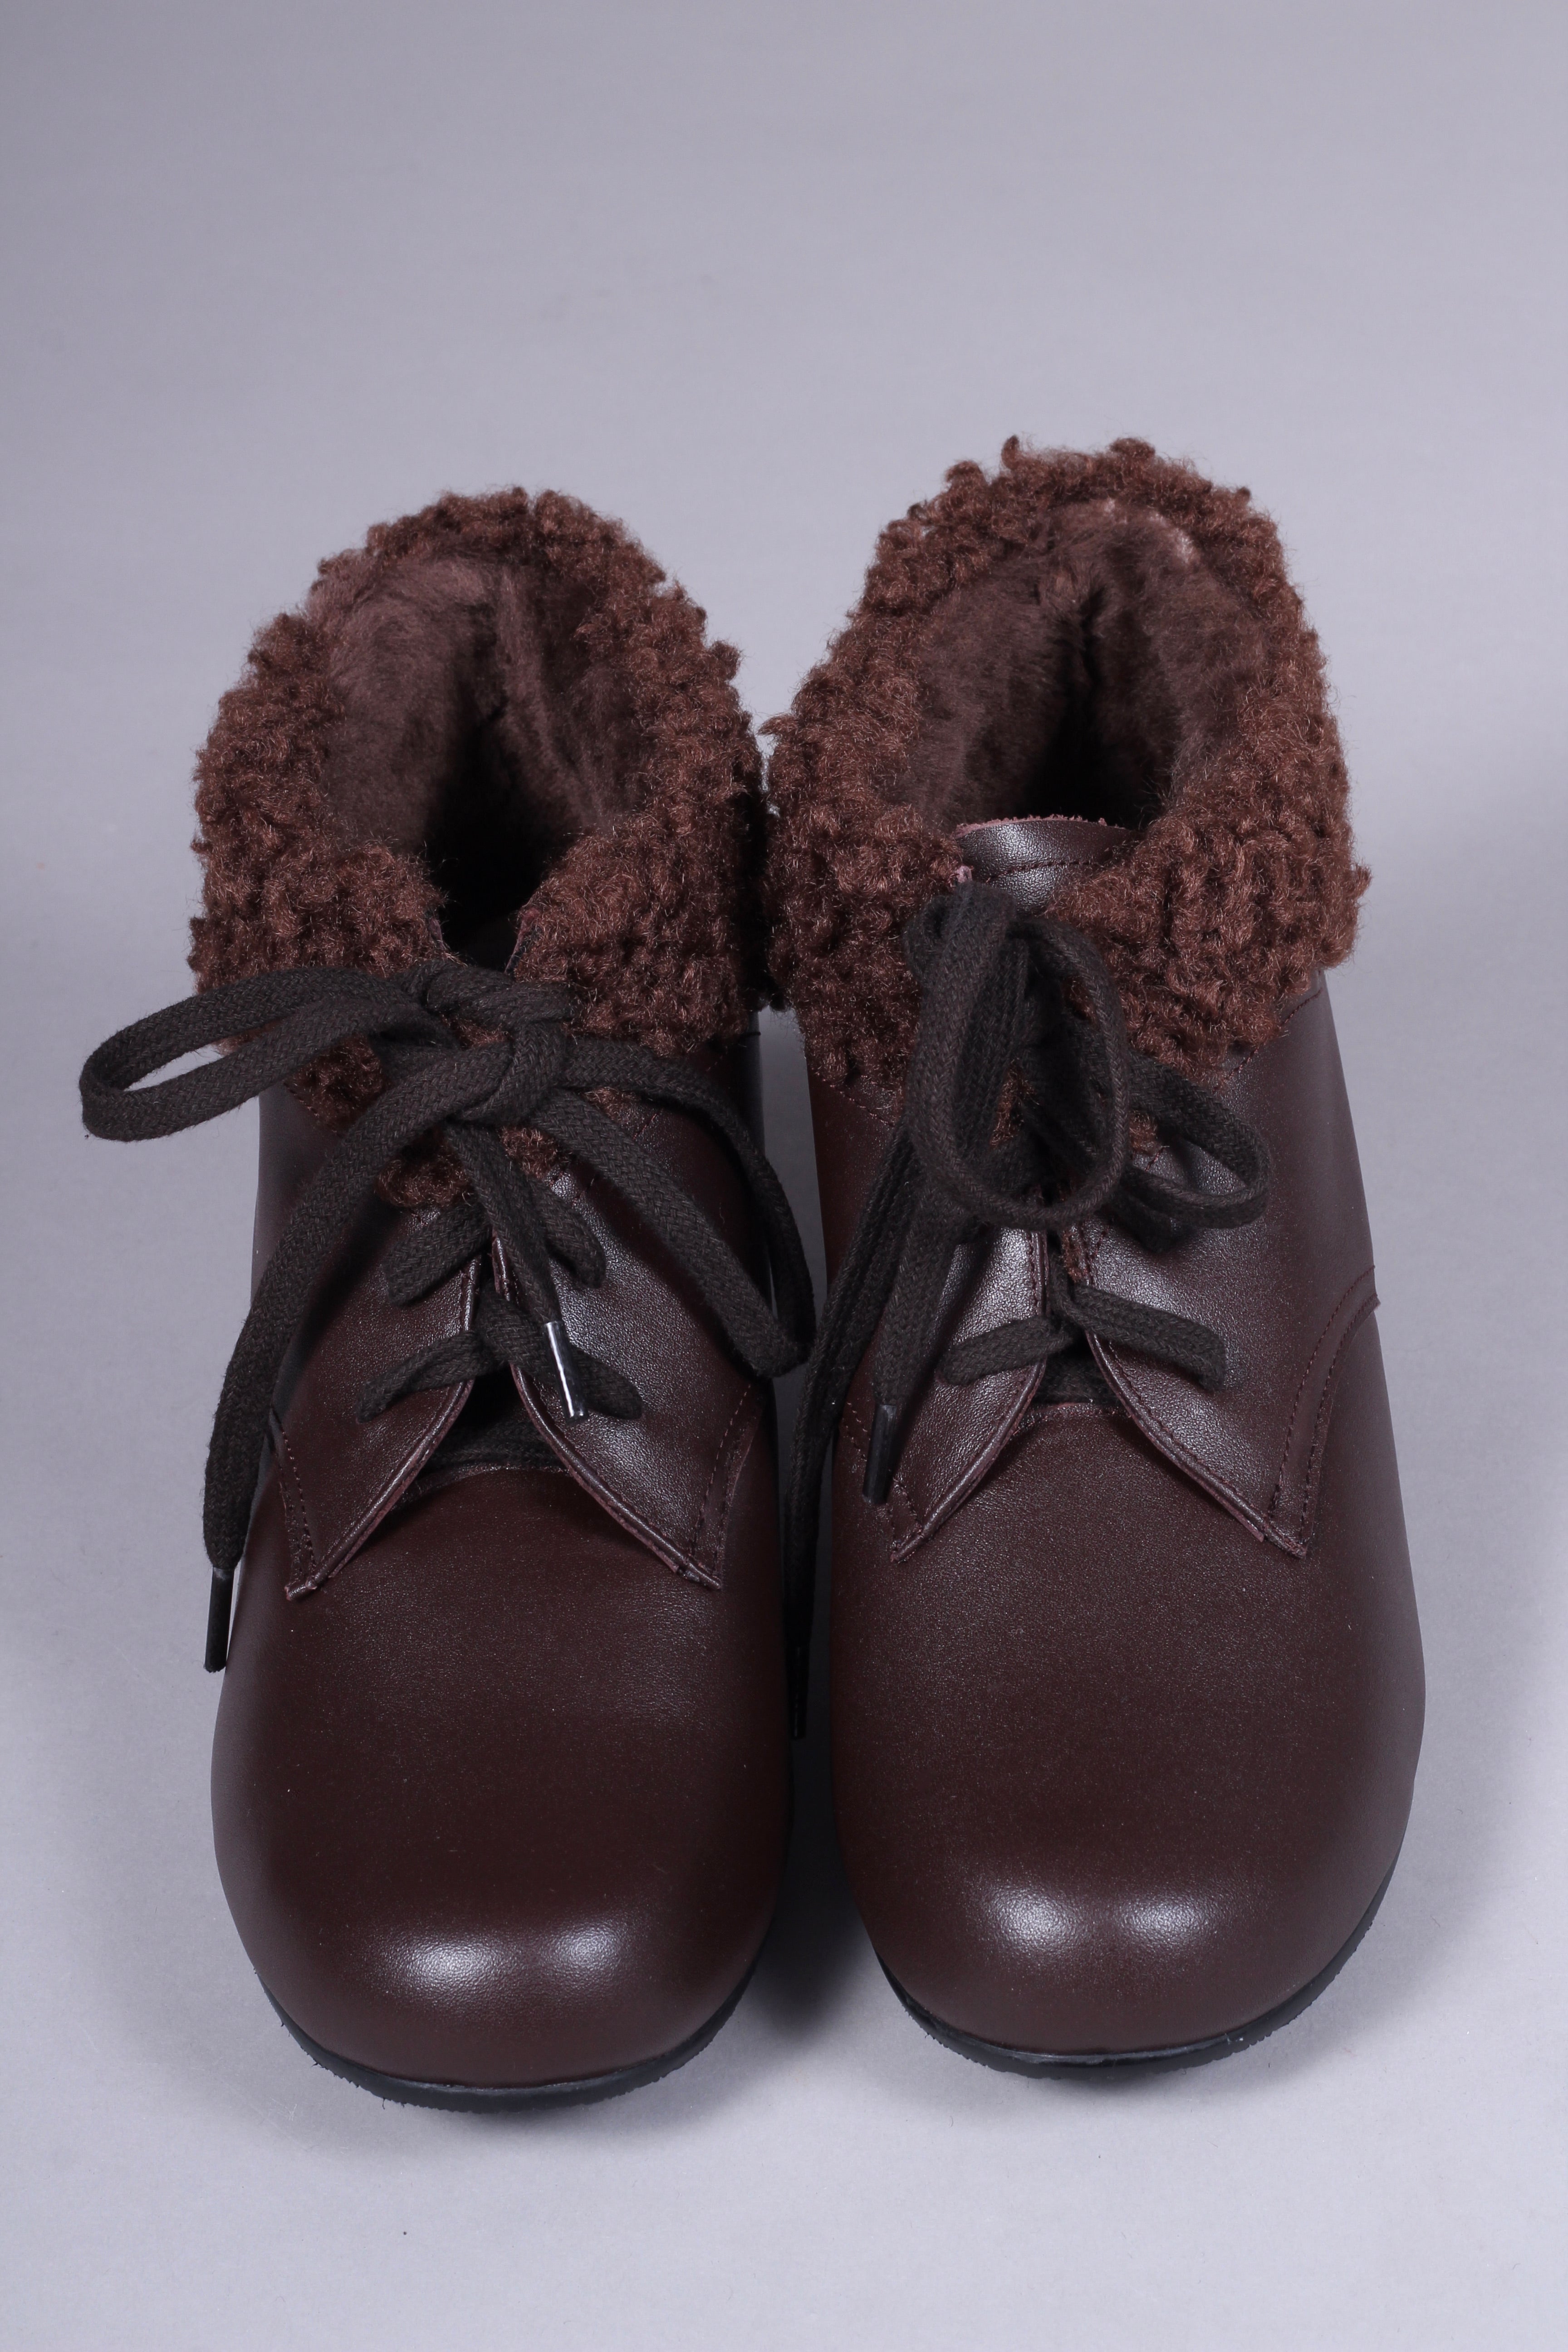 Soft 1940s /1950s style booties with fur - Dark Brown - Karin